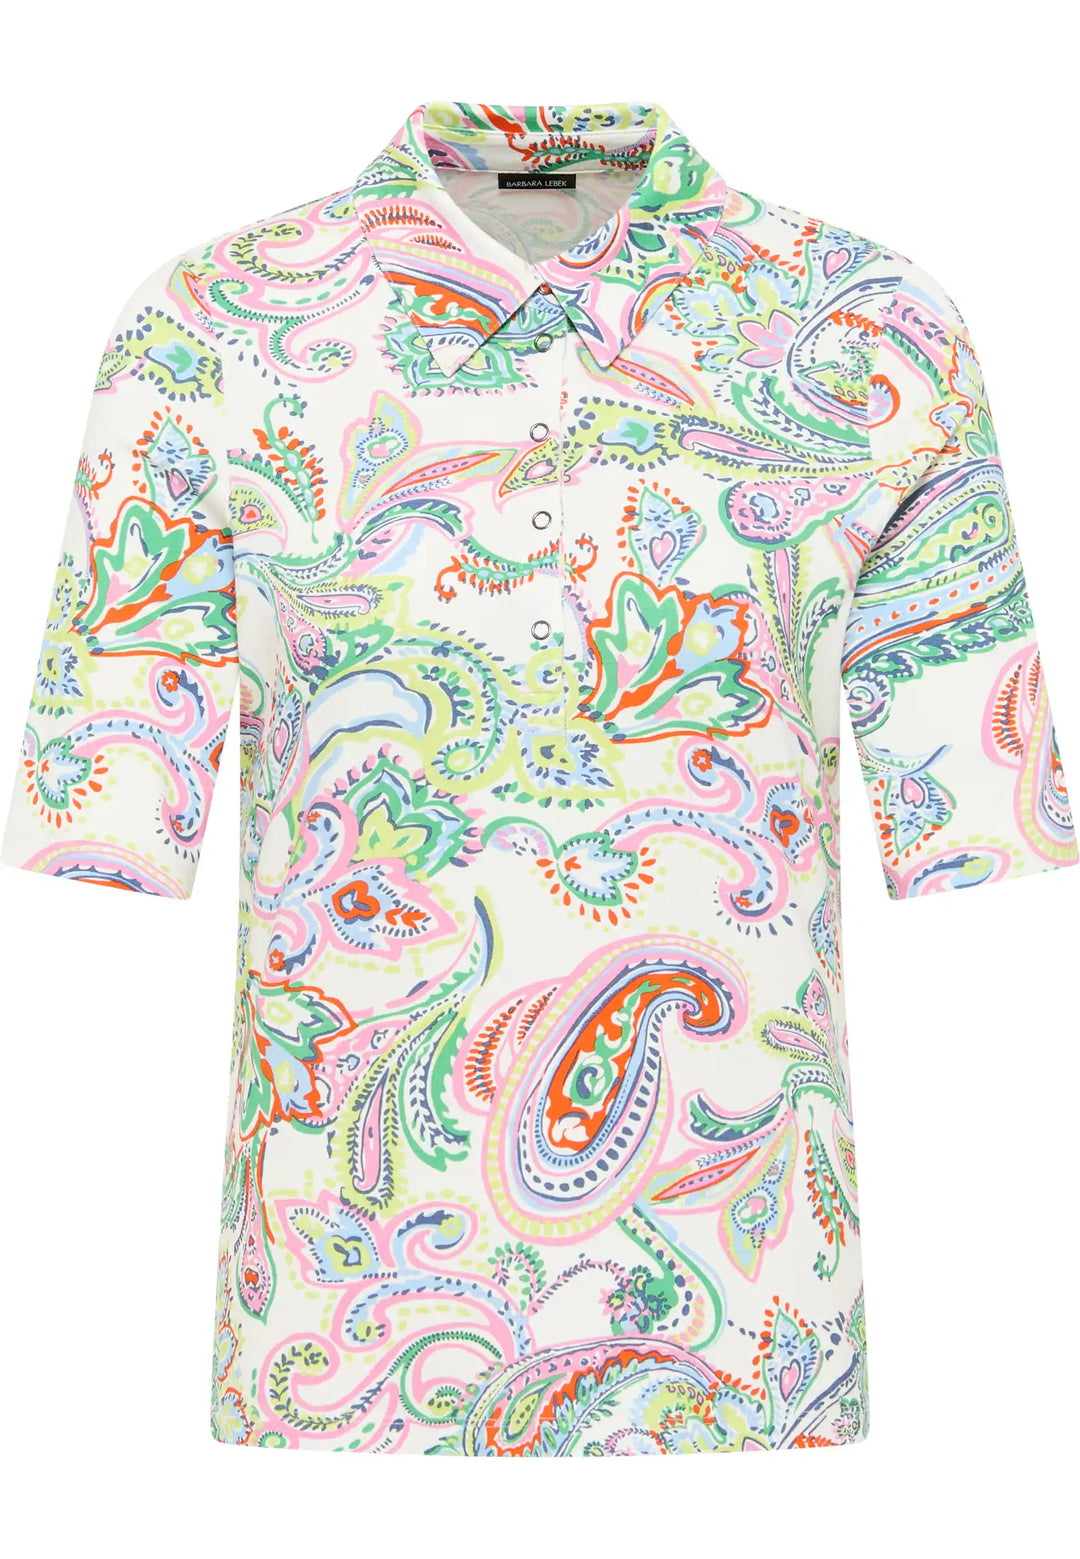 Short-sleeve polo shirt with white collar, paisley print in yellow, mint, blue, coral, style 62550042-650